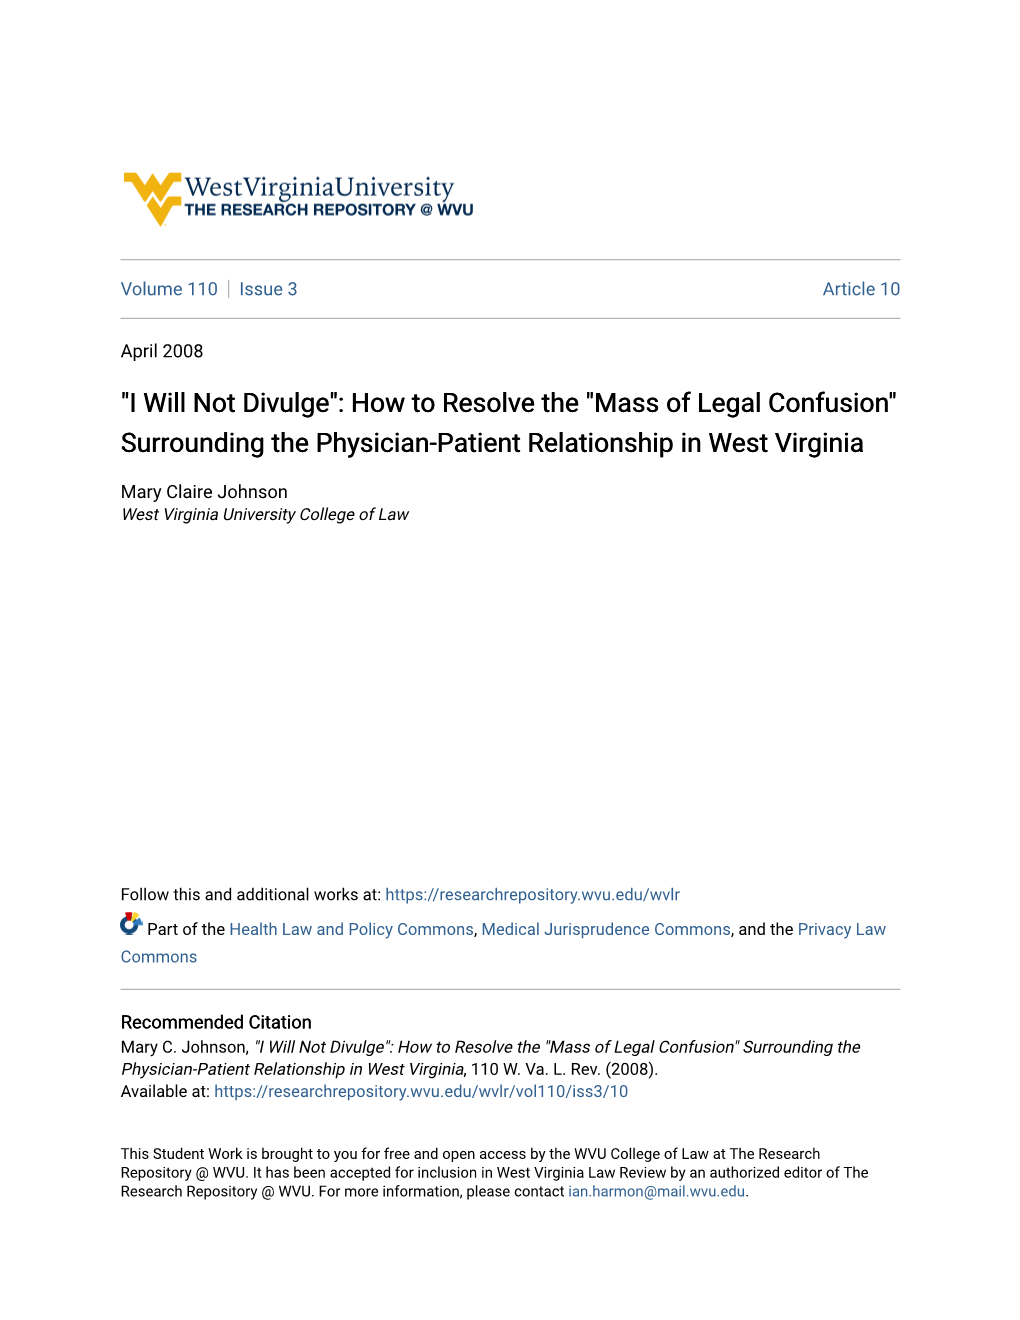 "I Will Not Divulge": How to Resolve the "Mass of Legal Confusion" Surrounding the Physician-Patient Relationship in West Virginia